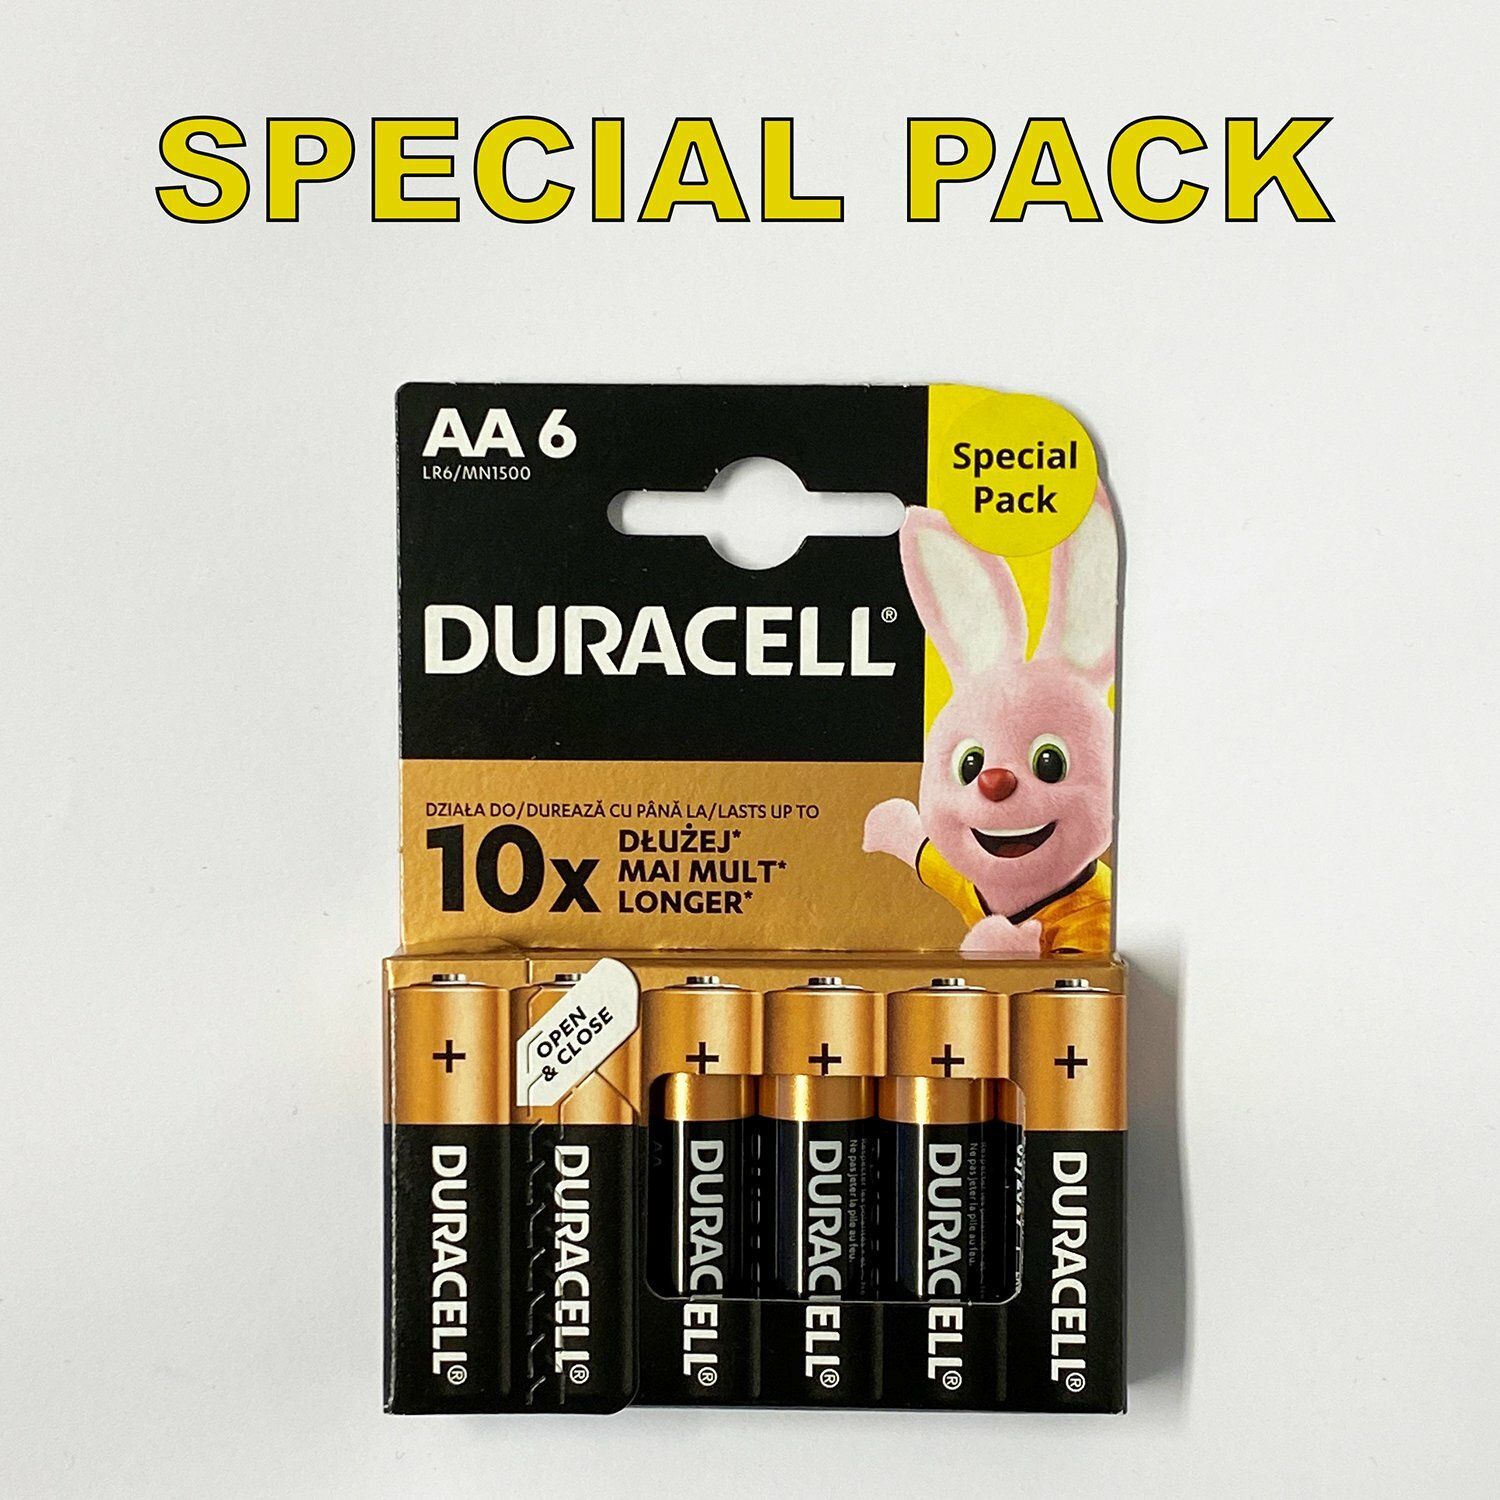 DURACELL Alkaline batteries AA (LR6/MN1500), special pack of 6